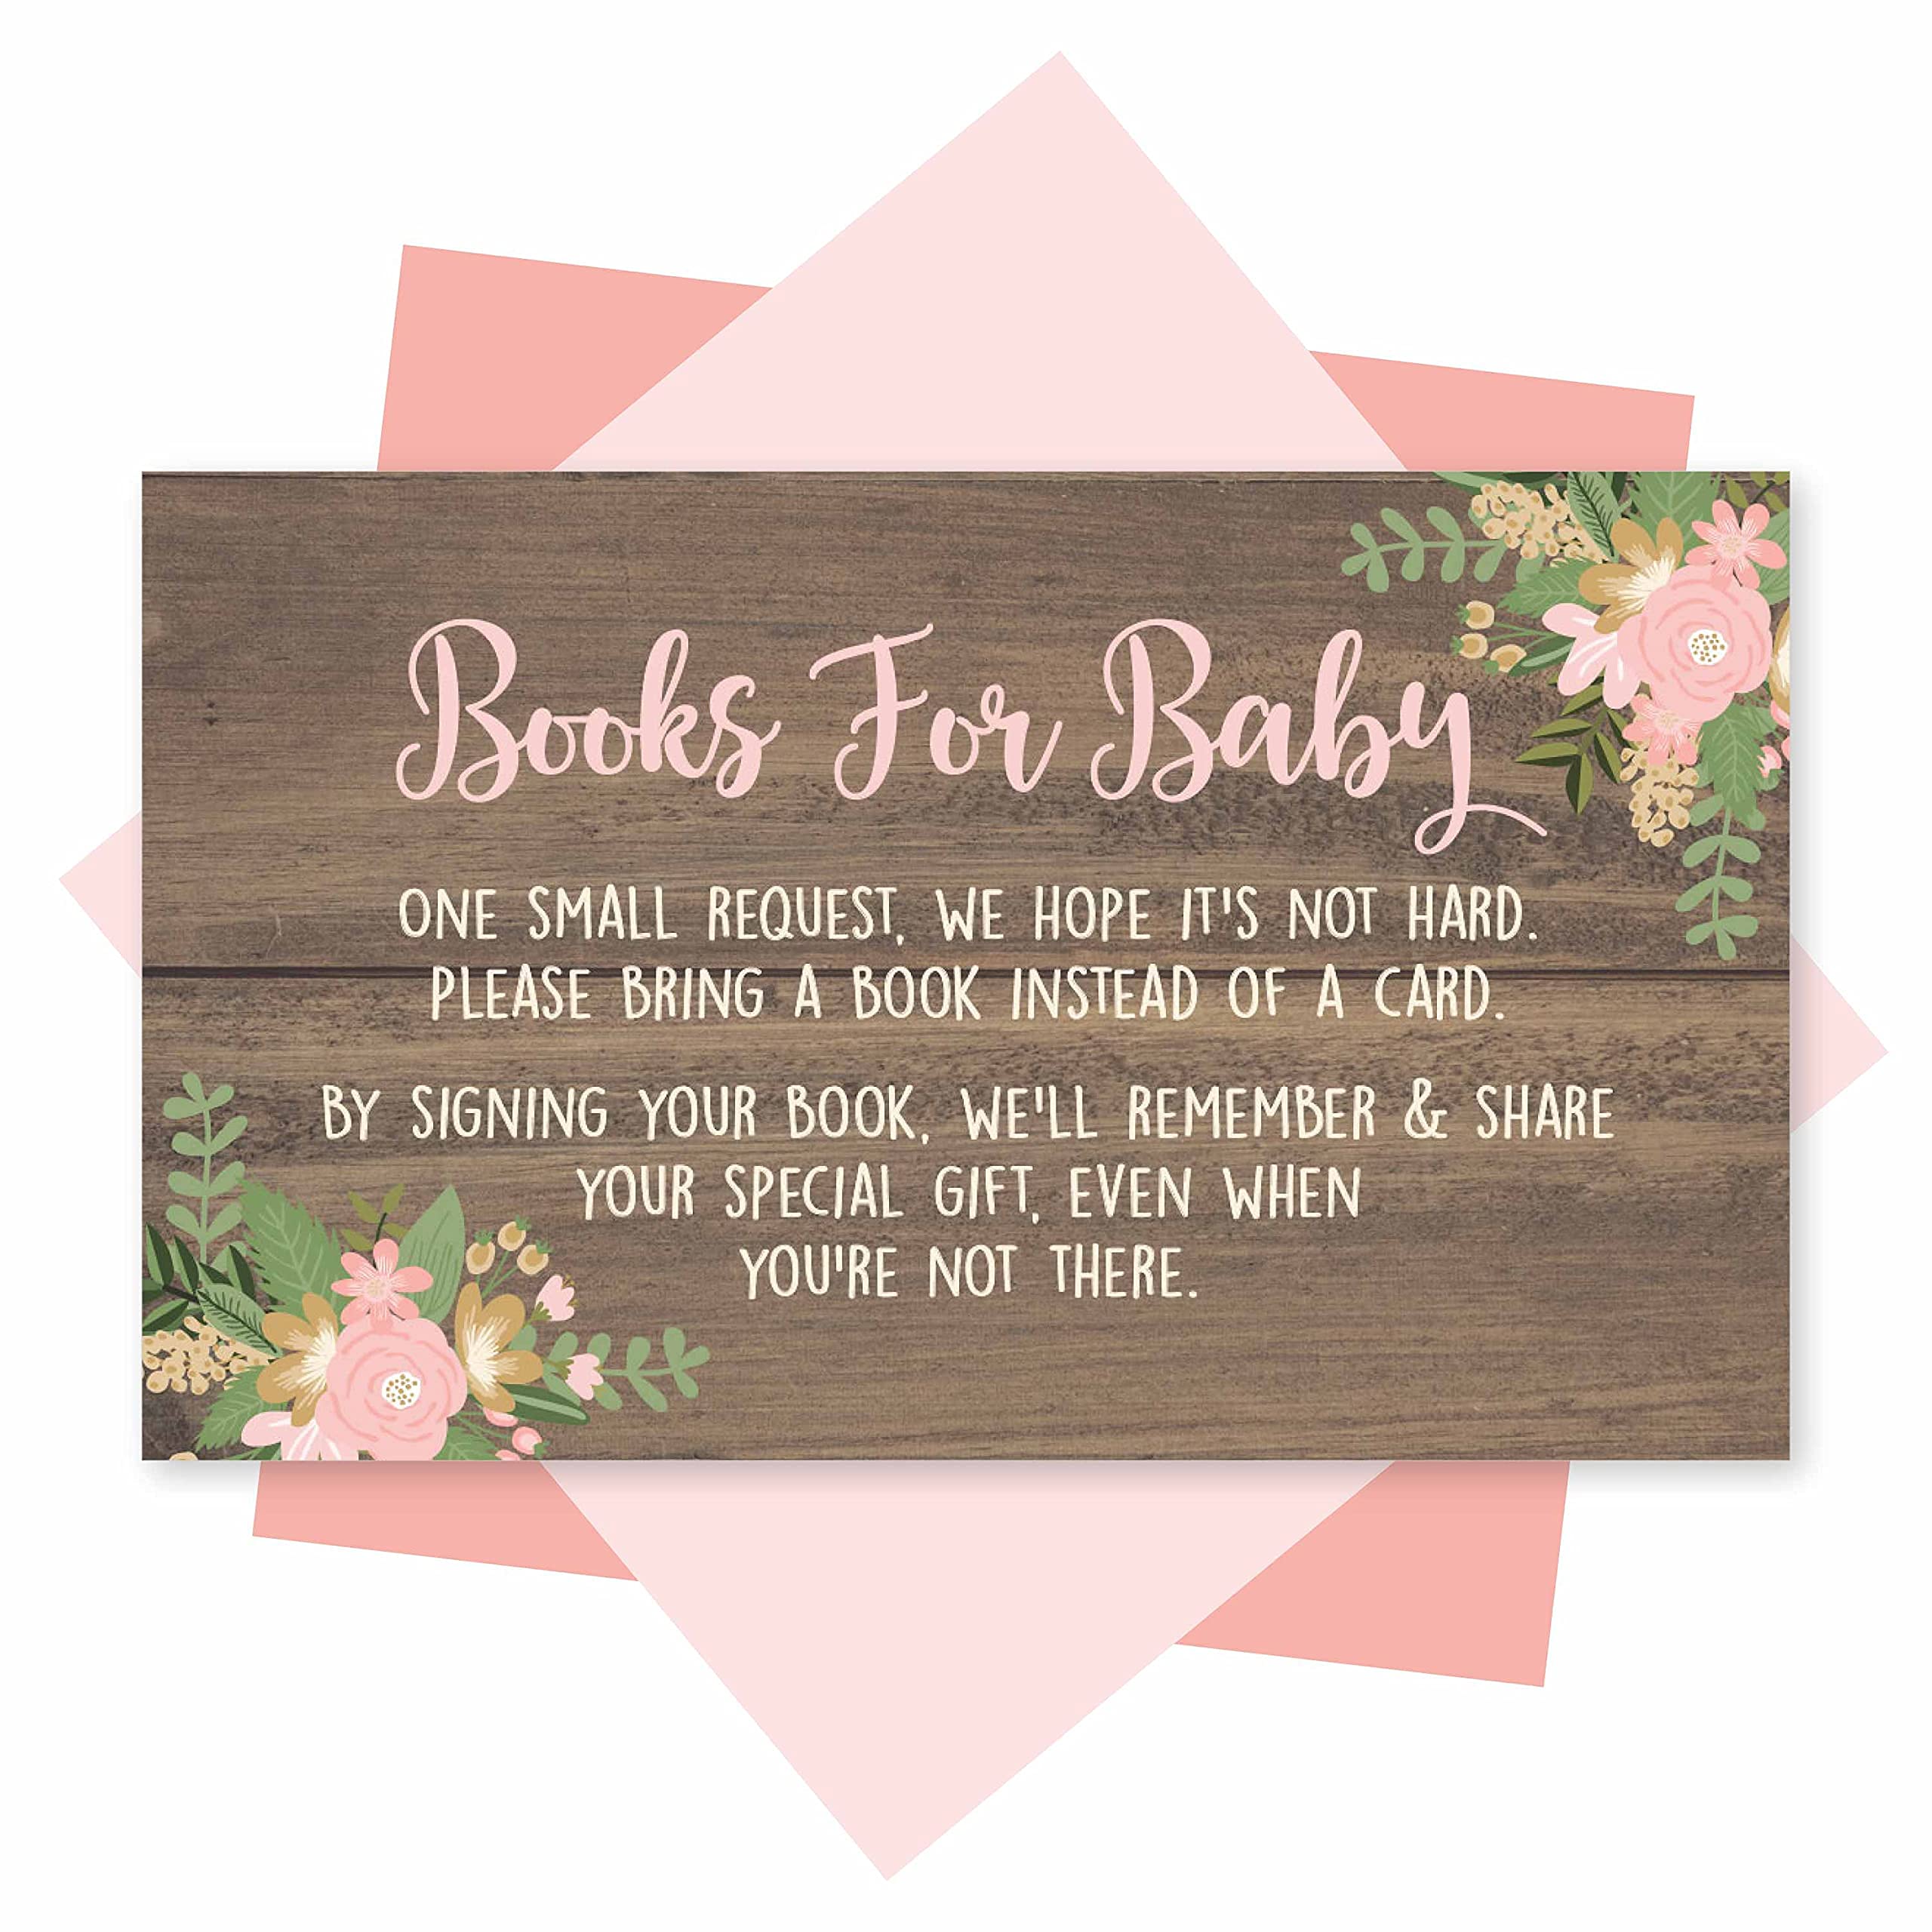 25 Oh Deer Baby Shower Invitations, 25 Books For Baby Shower Request Cards, Sprinkle Invite for Girl, Bring A Book Instead Of A Card, Baby Shower Invitation Inserts Baby Shower Guest Book Alternative